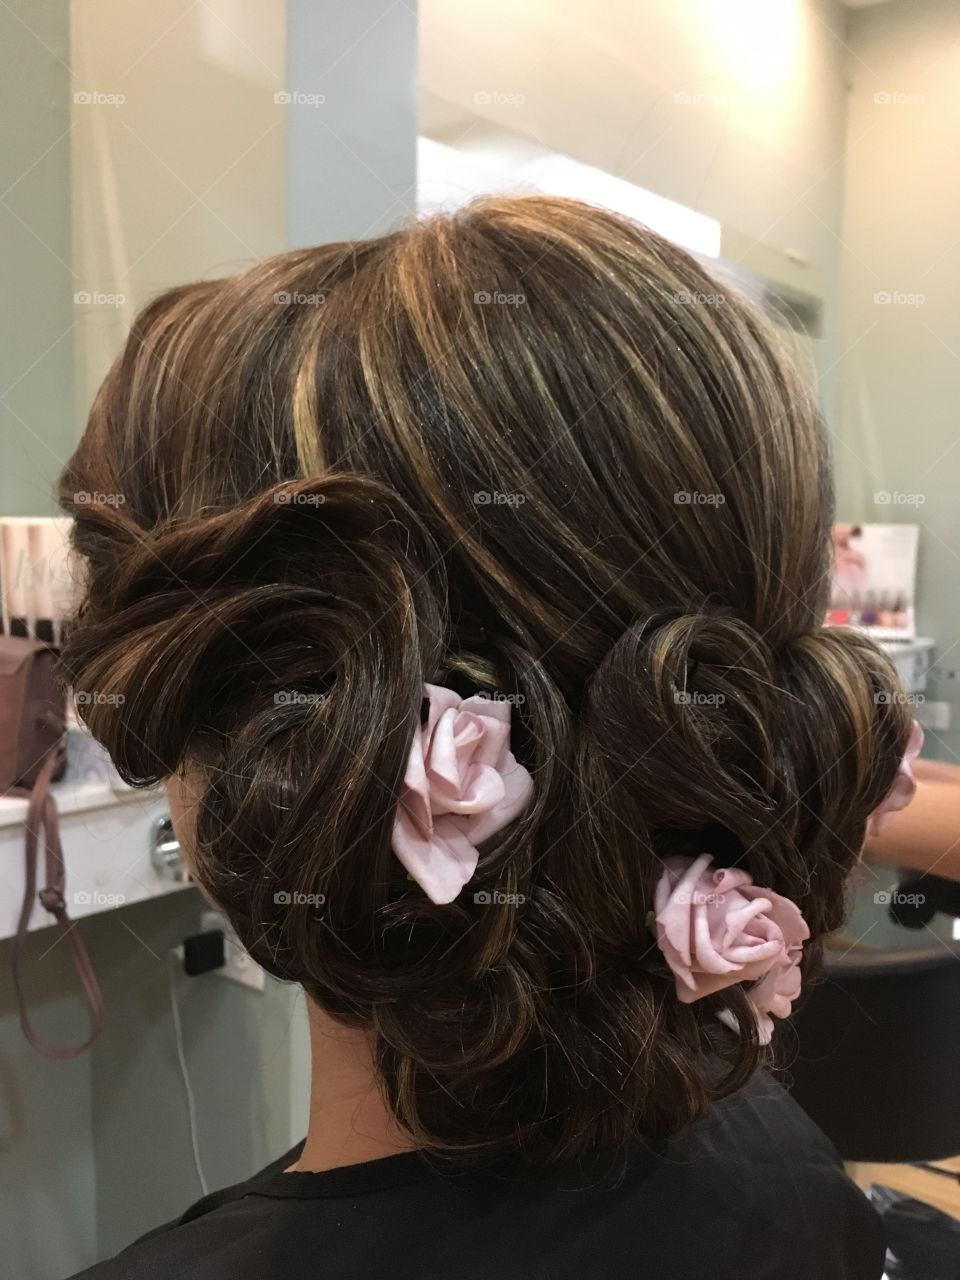 Beautiful Hairstyle with pink flowers 